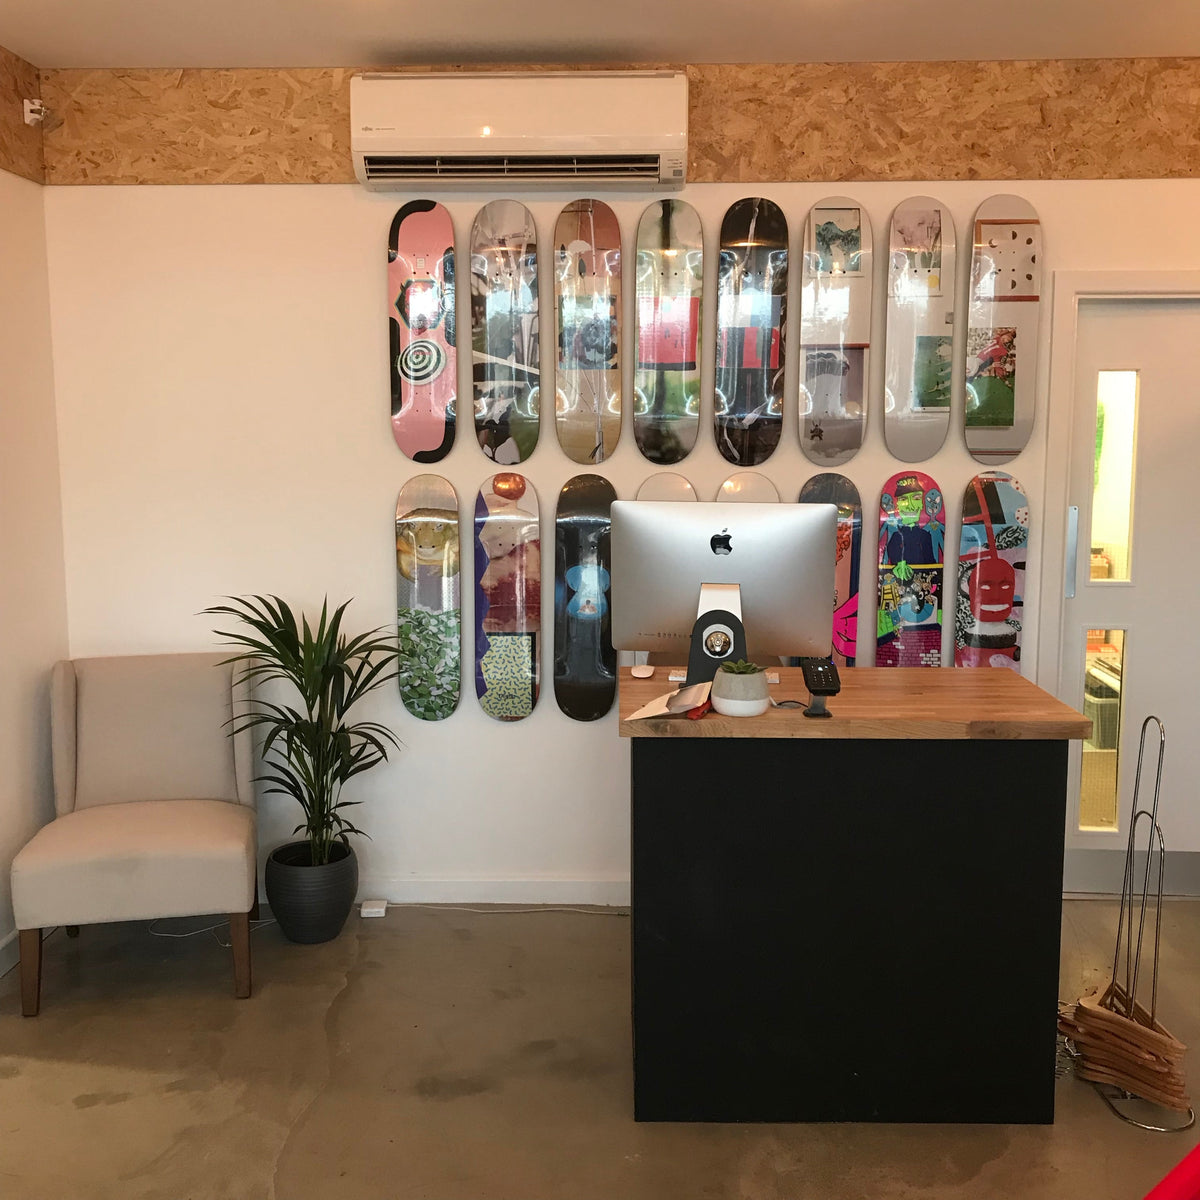 TVSC Gets a New Home - The Vines Skate Shop in Solihull